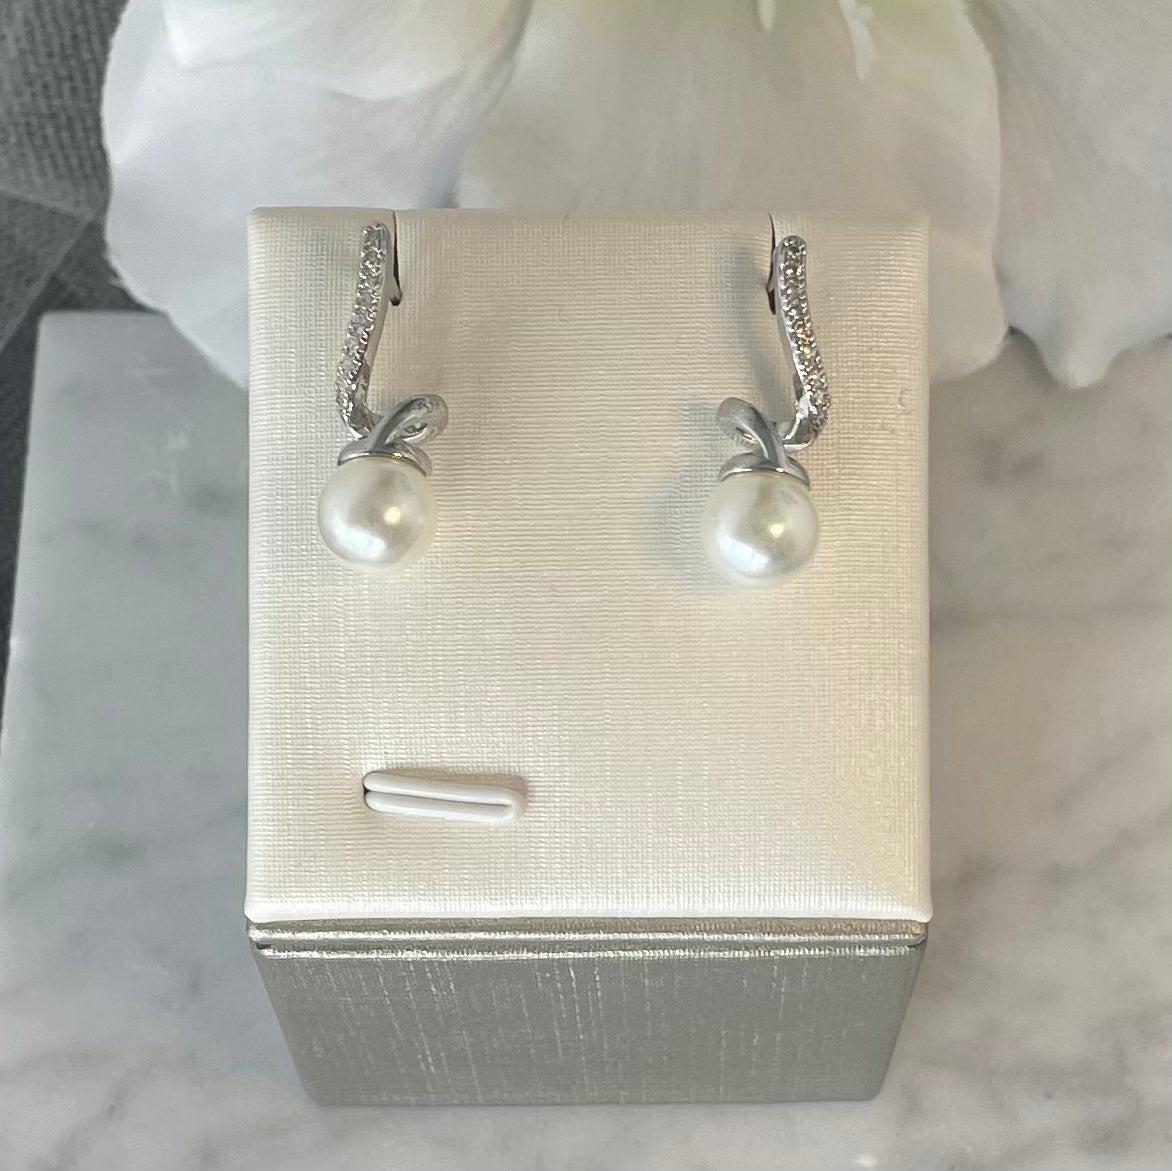 Anastasia Pearl Wedding Bridal Earrings with high-shine crystal design and pearl finish.